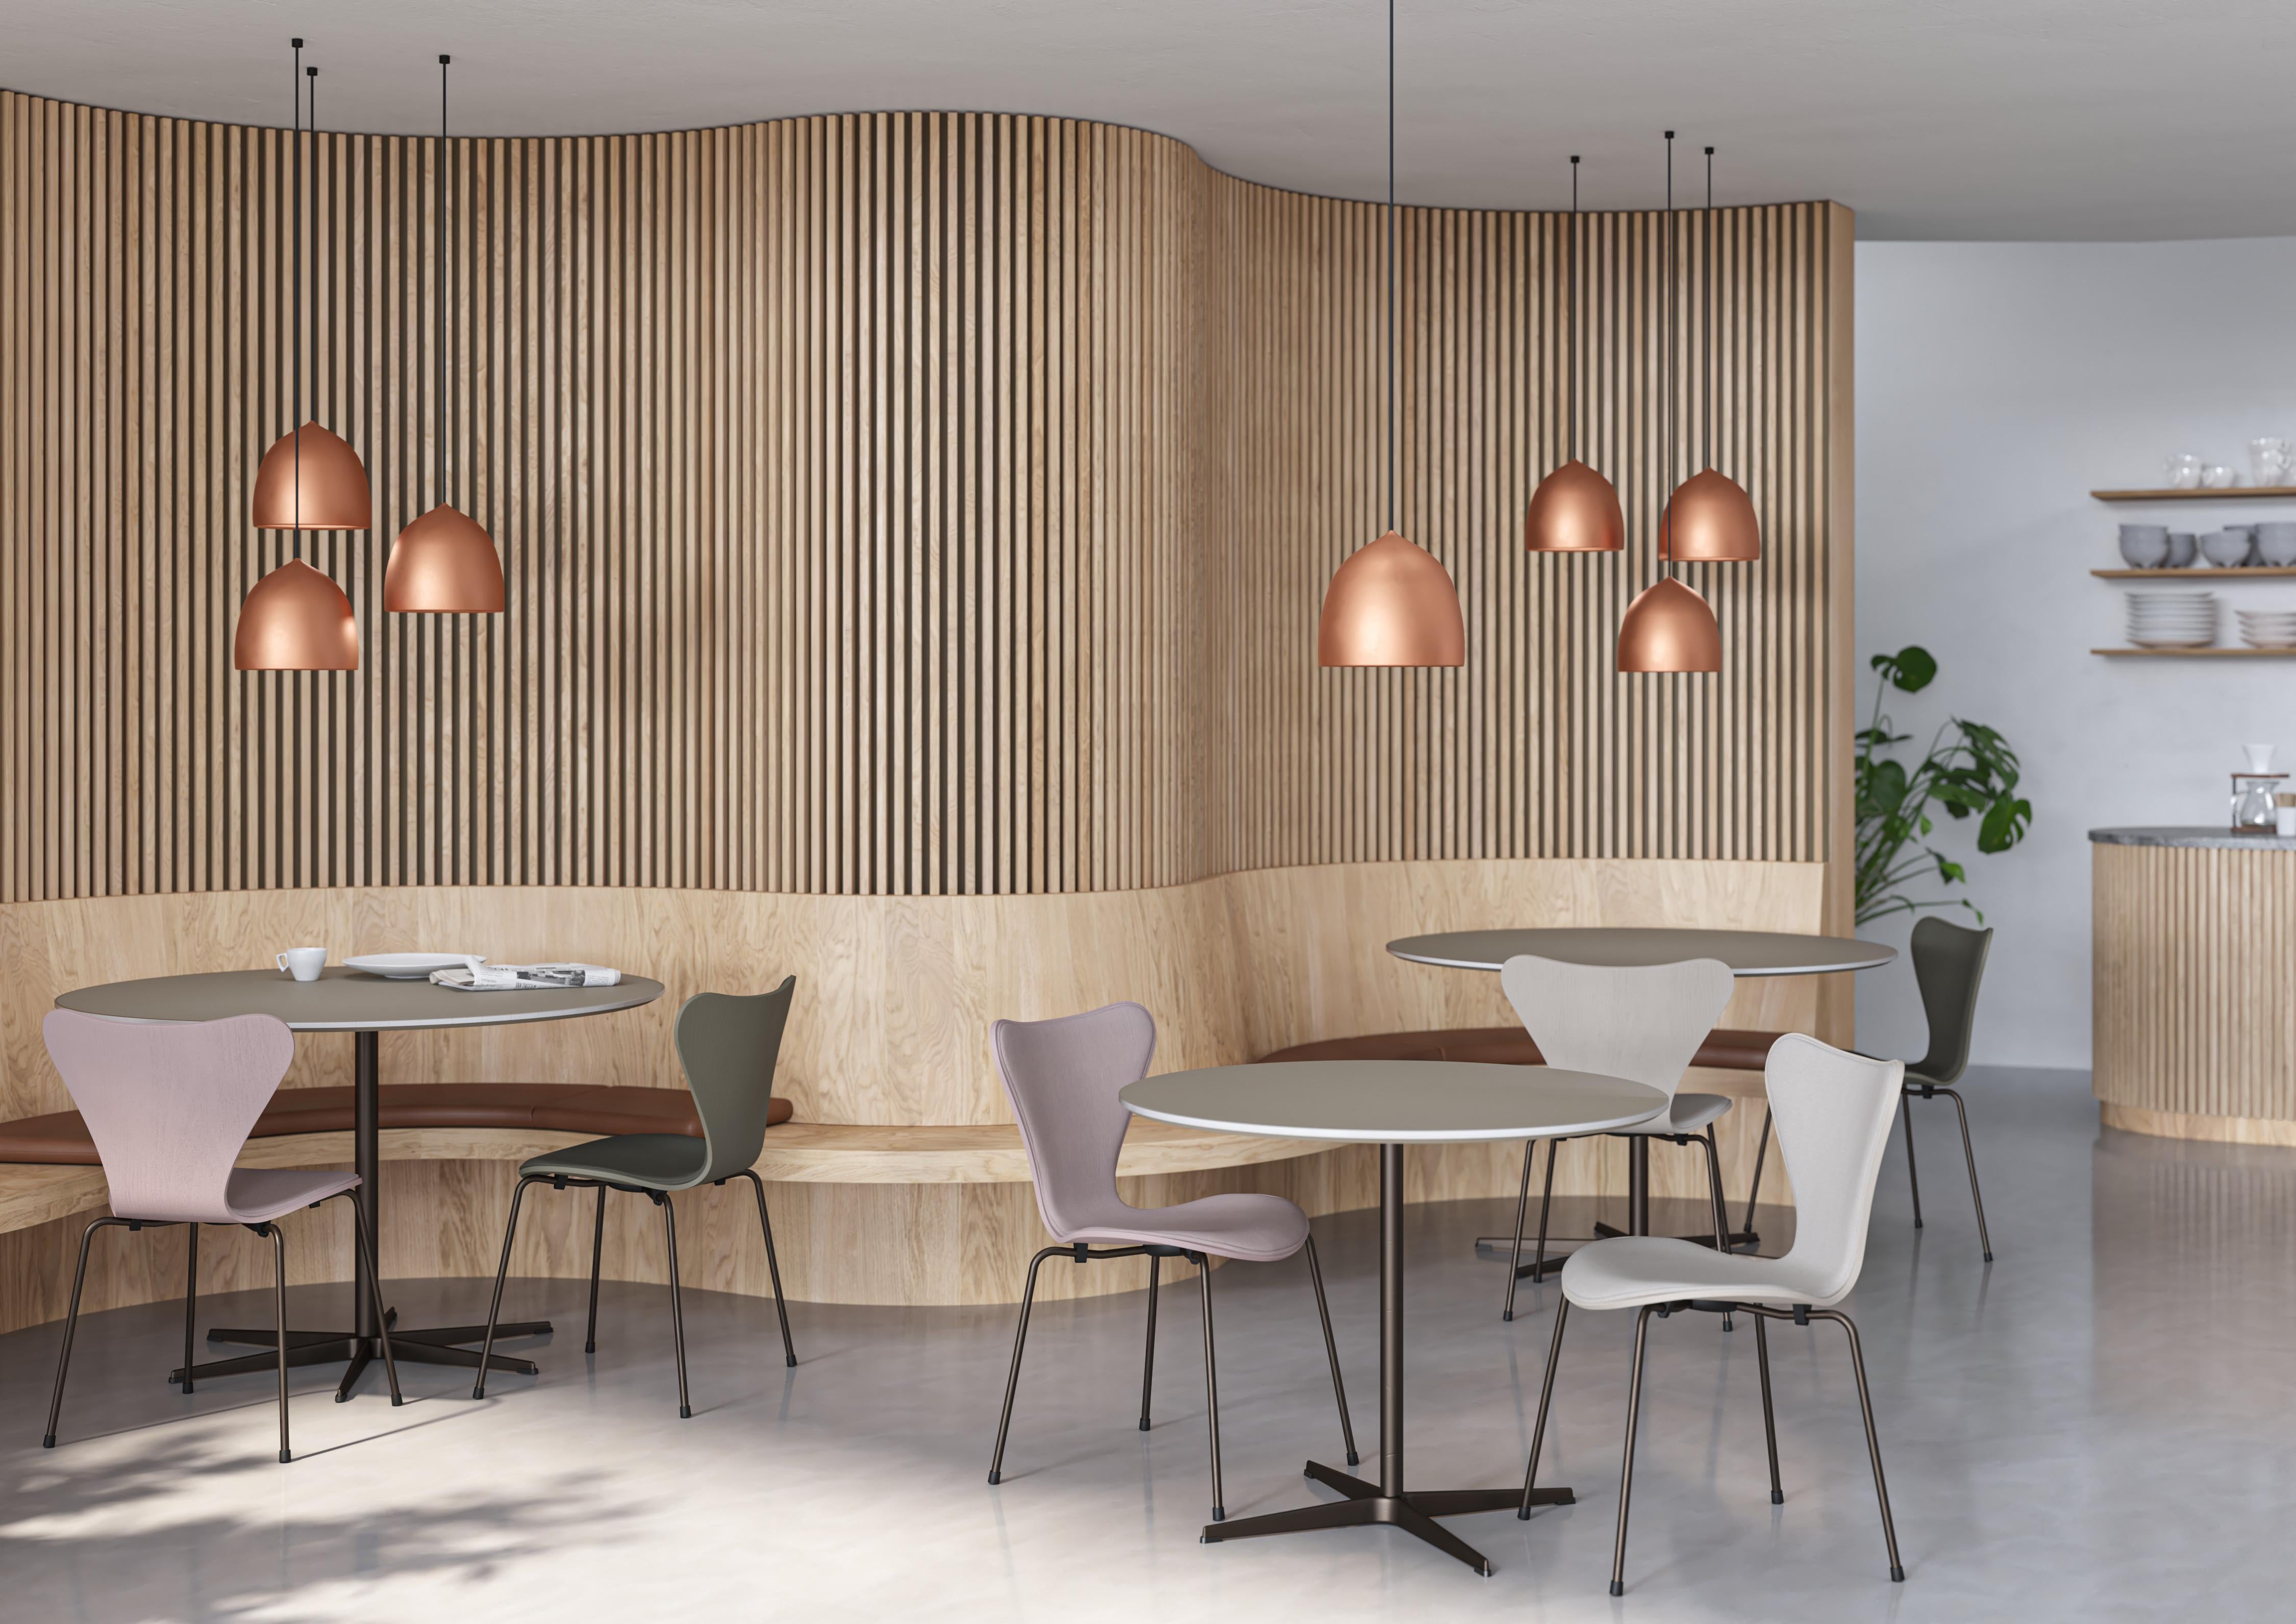 GamFratesi 'Suspence P1' Pendant Lamp for Fritz Hansen in Copper.

Established in 1872, Fritz Hansen has become synonymous with legendary Danish design. Combining timeless craftsmanship with an emphasis on sustainability, the brand’s re-editions of